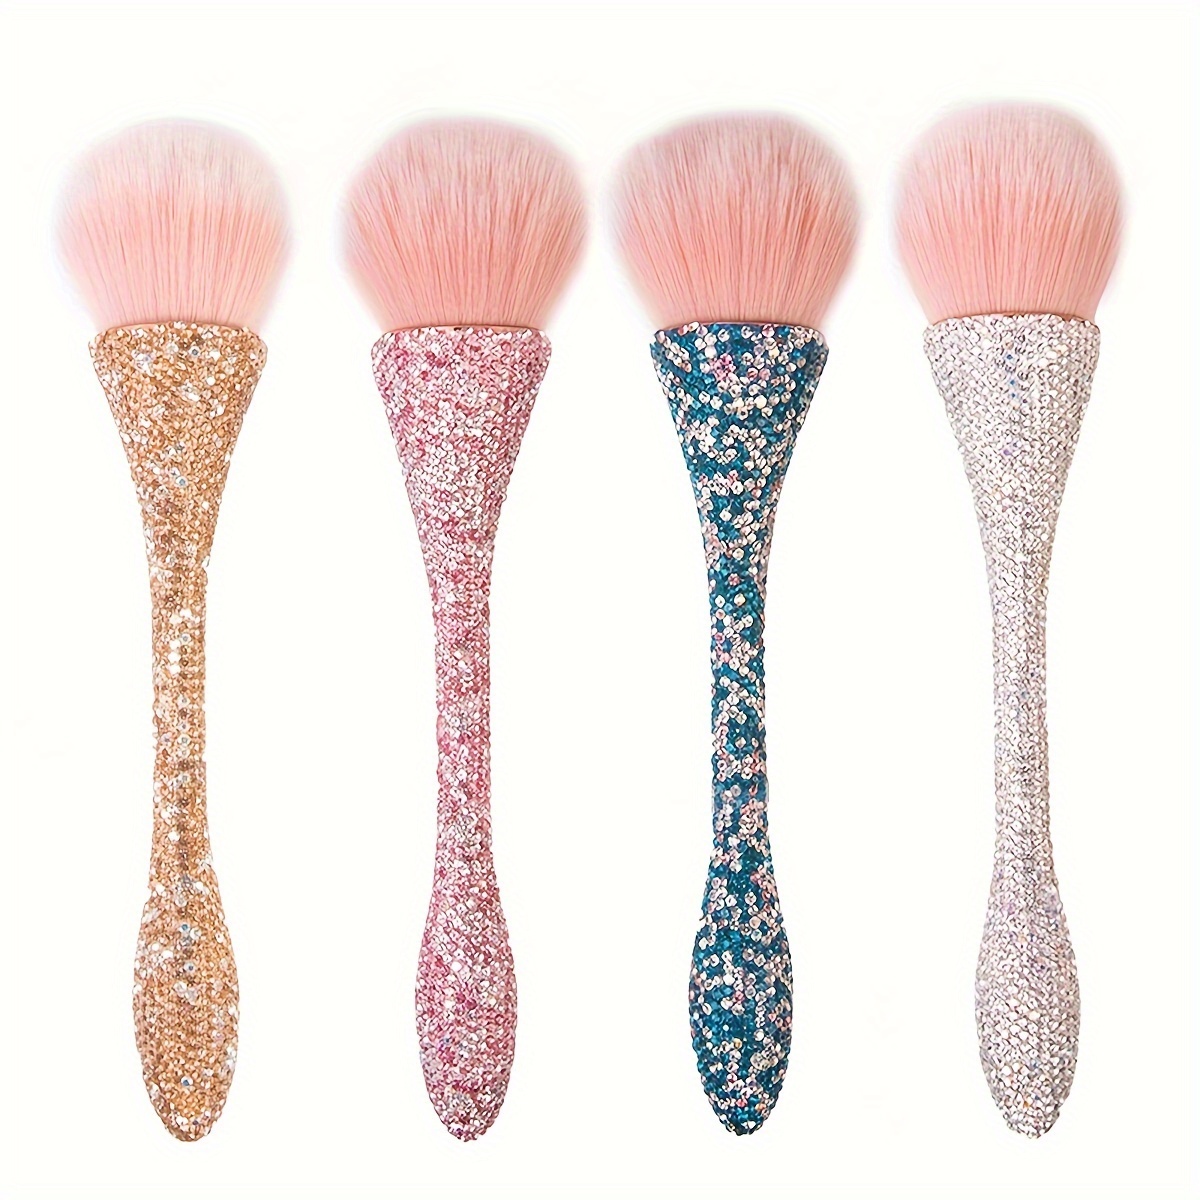 

Nail Art Dust Cleaner Brushes, Rhinestone Acrylic Handle, Soft No-shed Bristles, Multifunctional For Manicure, Blush, Contouring, Sparkling Design, Portable Beauty Tool Set